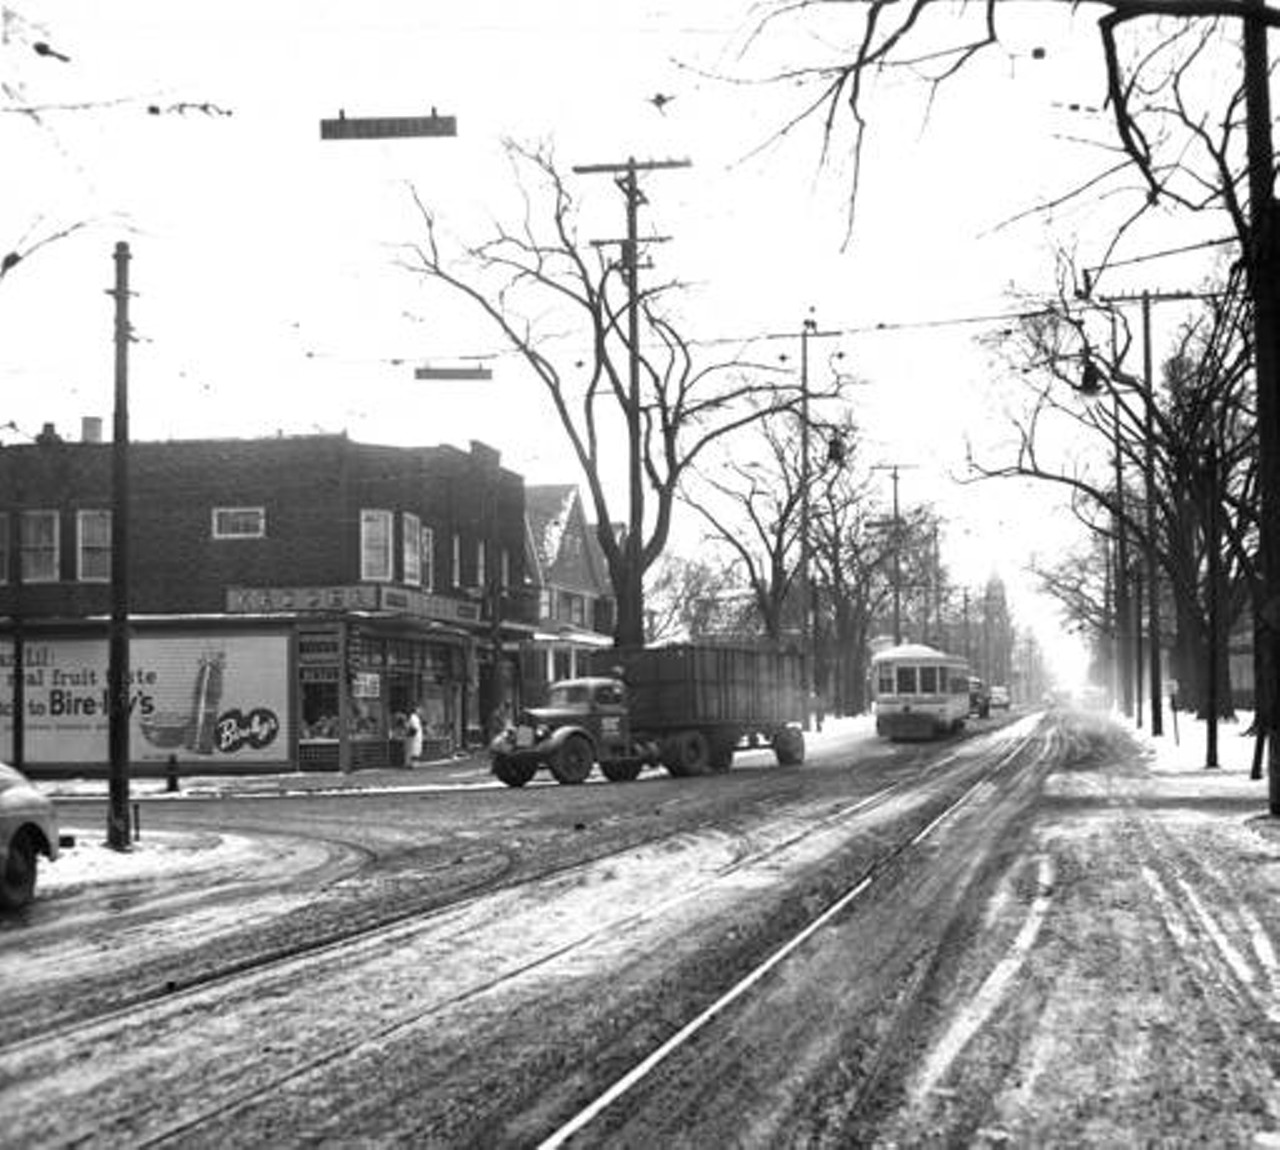 West 65th and Bridge Ave, 1947